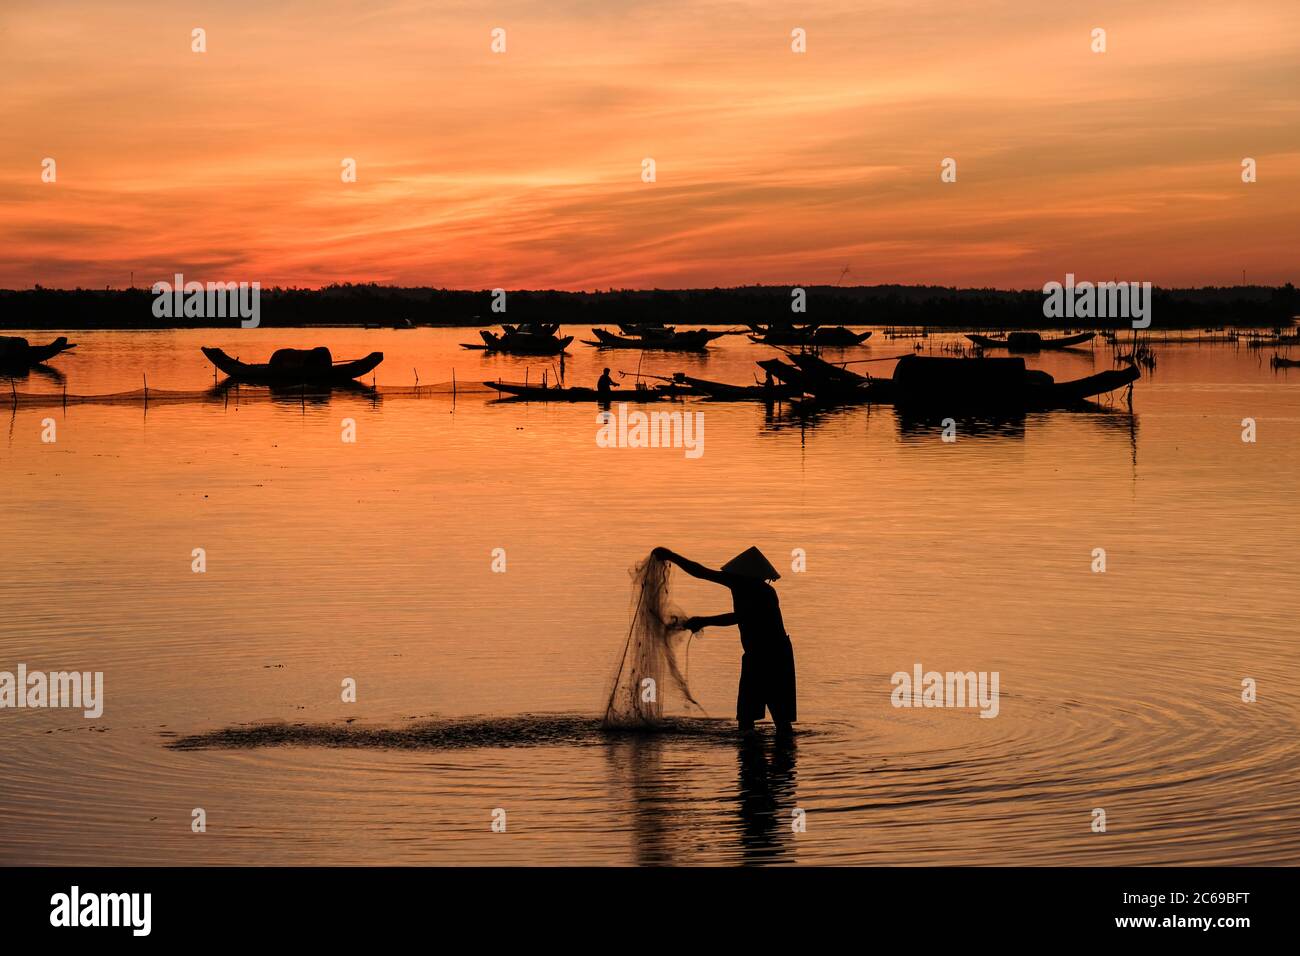 Silhouette of a fisherman standing in river with a fishing net at sunrise, Vietnam Stock Photo